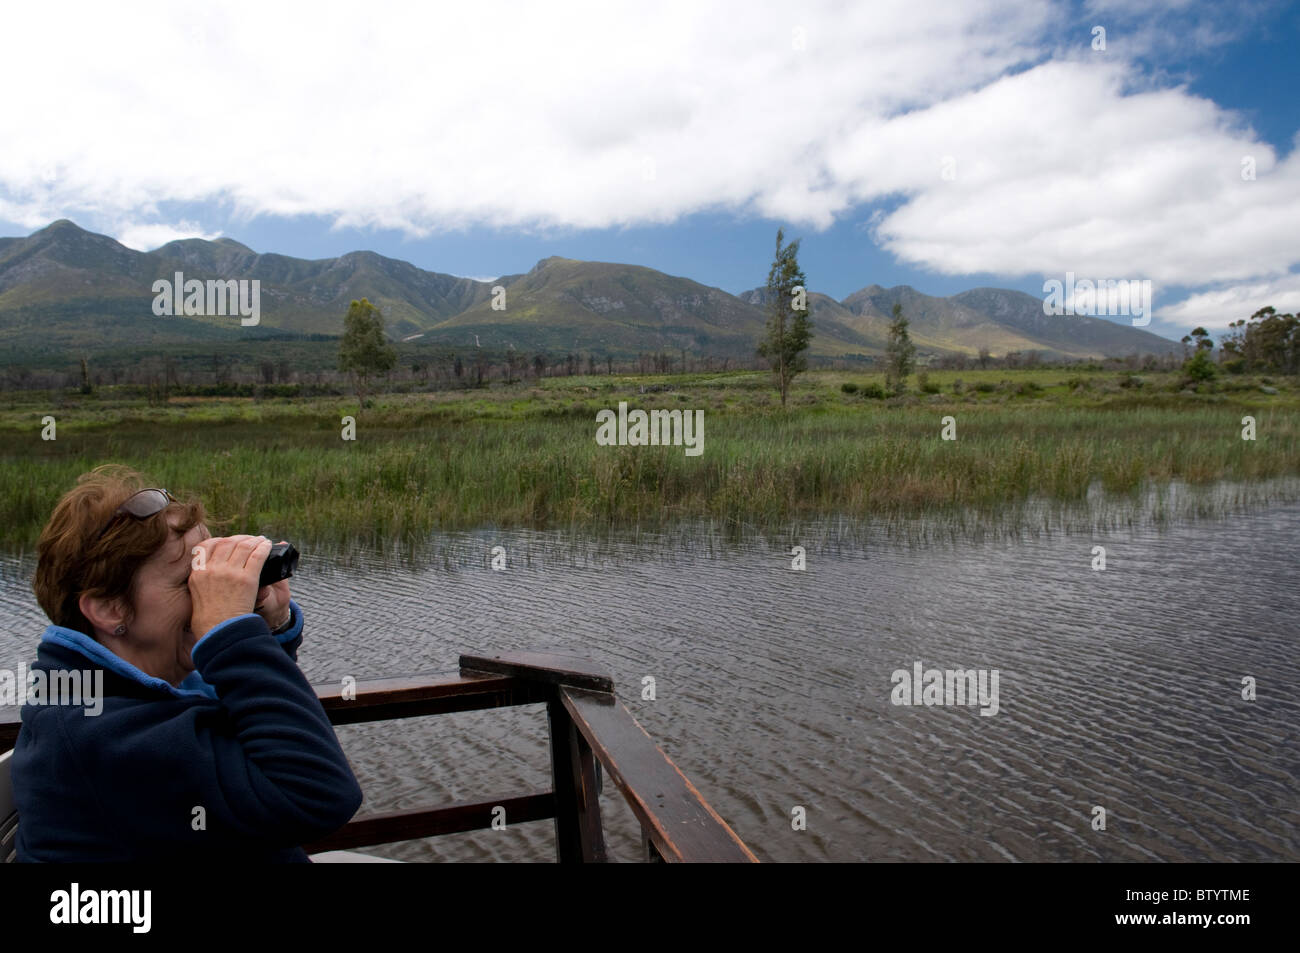 Woman sitting on a viewing area and looking through binoculars Stock Photo